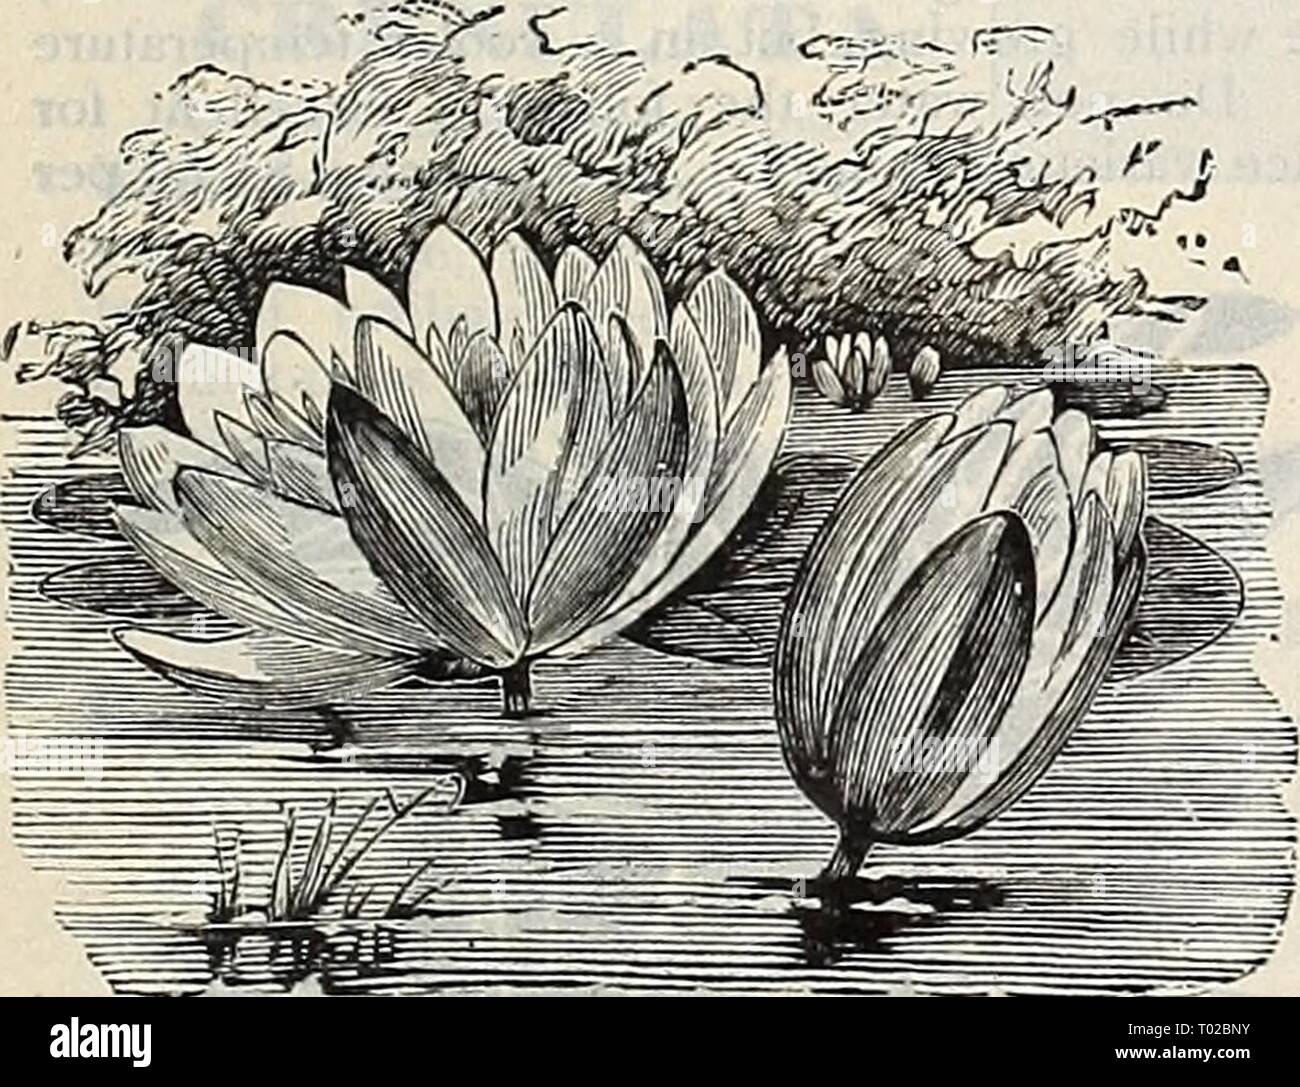 Dreer's garden calendar : 1899 . dreersgardencale1899henr Year: 1899  Stratiotes Aloides (Water Aloe)    SEEDS OF WATER LILIES. Raising seedling plants of all kinds has a peculiar charm and fascination, and a few remarks on the growing of Water Lilies from seed may be of service. The soil should be precisely the same as is used for the vast majority of flower seeds; that is, any good garden soil, nicely sifted, with a small addition of sand. The Tender Nymphaeas and Victorias should be sown in early Spring. It is advisable to sow the hardy sorts late in Autumn, the seed usually lying dormant t Stock Photo